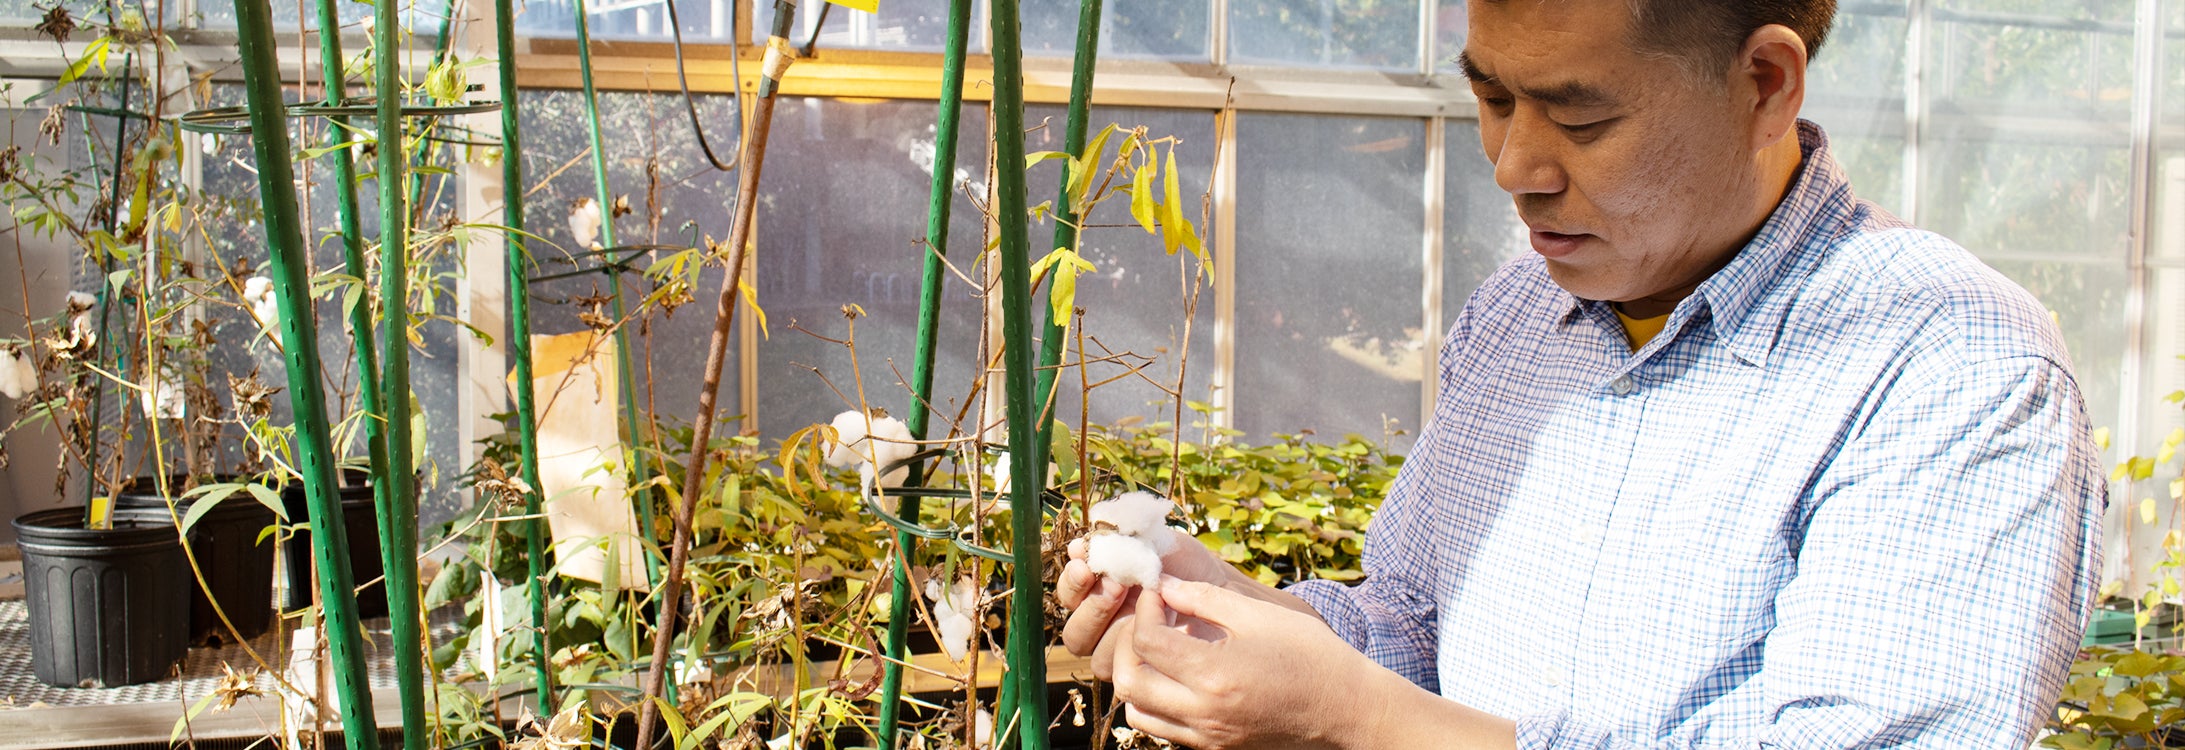 East Carolina University professor Baohong Zhang examines cotton fibers grown in his lab that were modified using gene-editing tools. Zhang’s research into cotton growth and development was recognized this week after he was named a fellow to the American Association for the Advancement of Science.